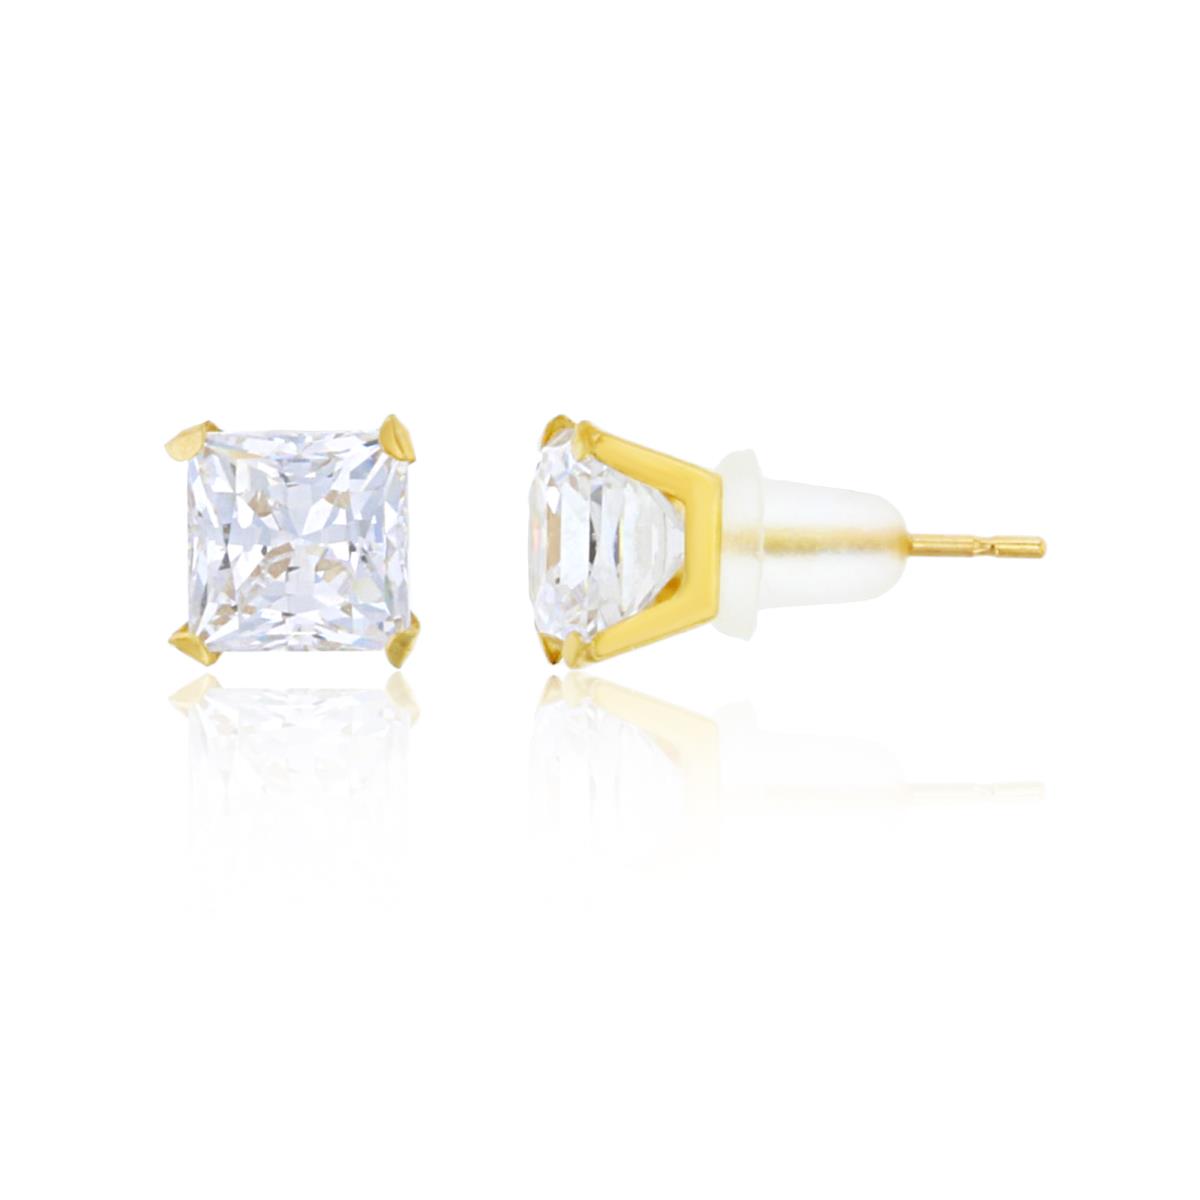 14K Yellow Gold 5.00mm 4-Prong Princess Cut Solitaire Stud & 14K Silicone Back